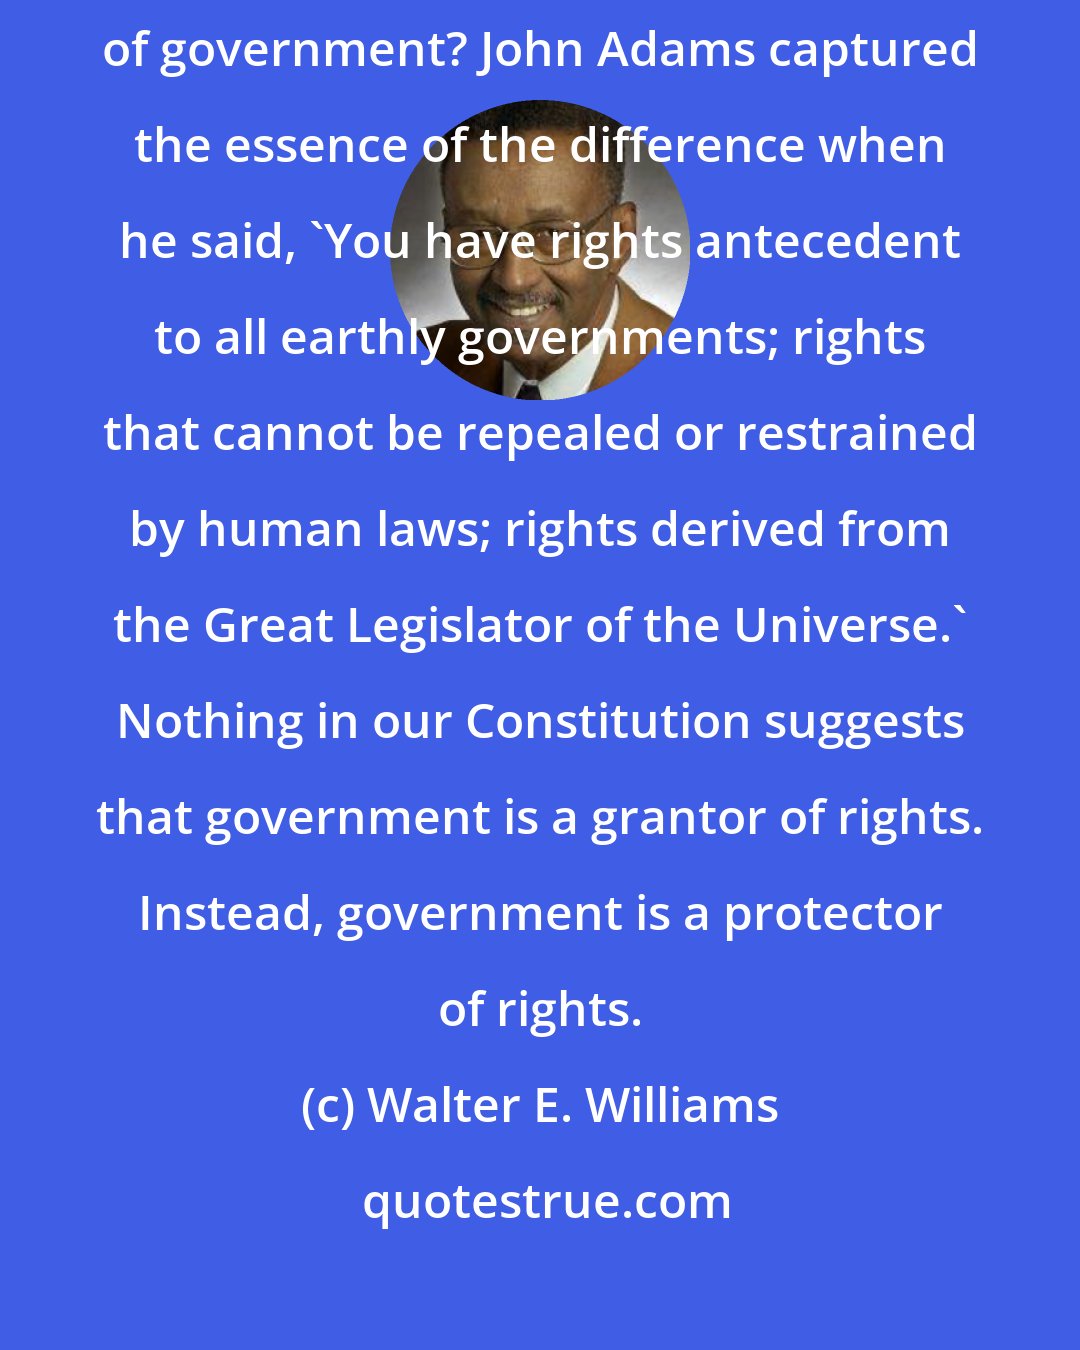 Walter E. Williams: So what's the difference between republican and democratic forms of government? John Adams captured the essence of the difference when he said, 'You have rights antecedent to all earthly governments; rights that cannot be repealed or restrained by human laws; rights derived from the Great Legislator of the Universe.' Nothing in our Constitution suggests that government is a grantor of rights. Instead, government is a protector of rights.